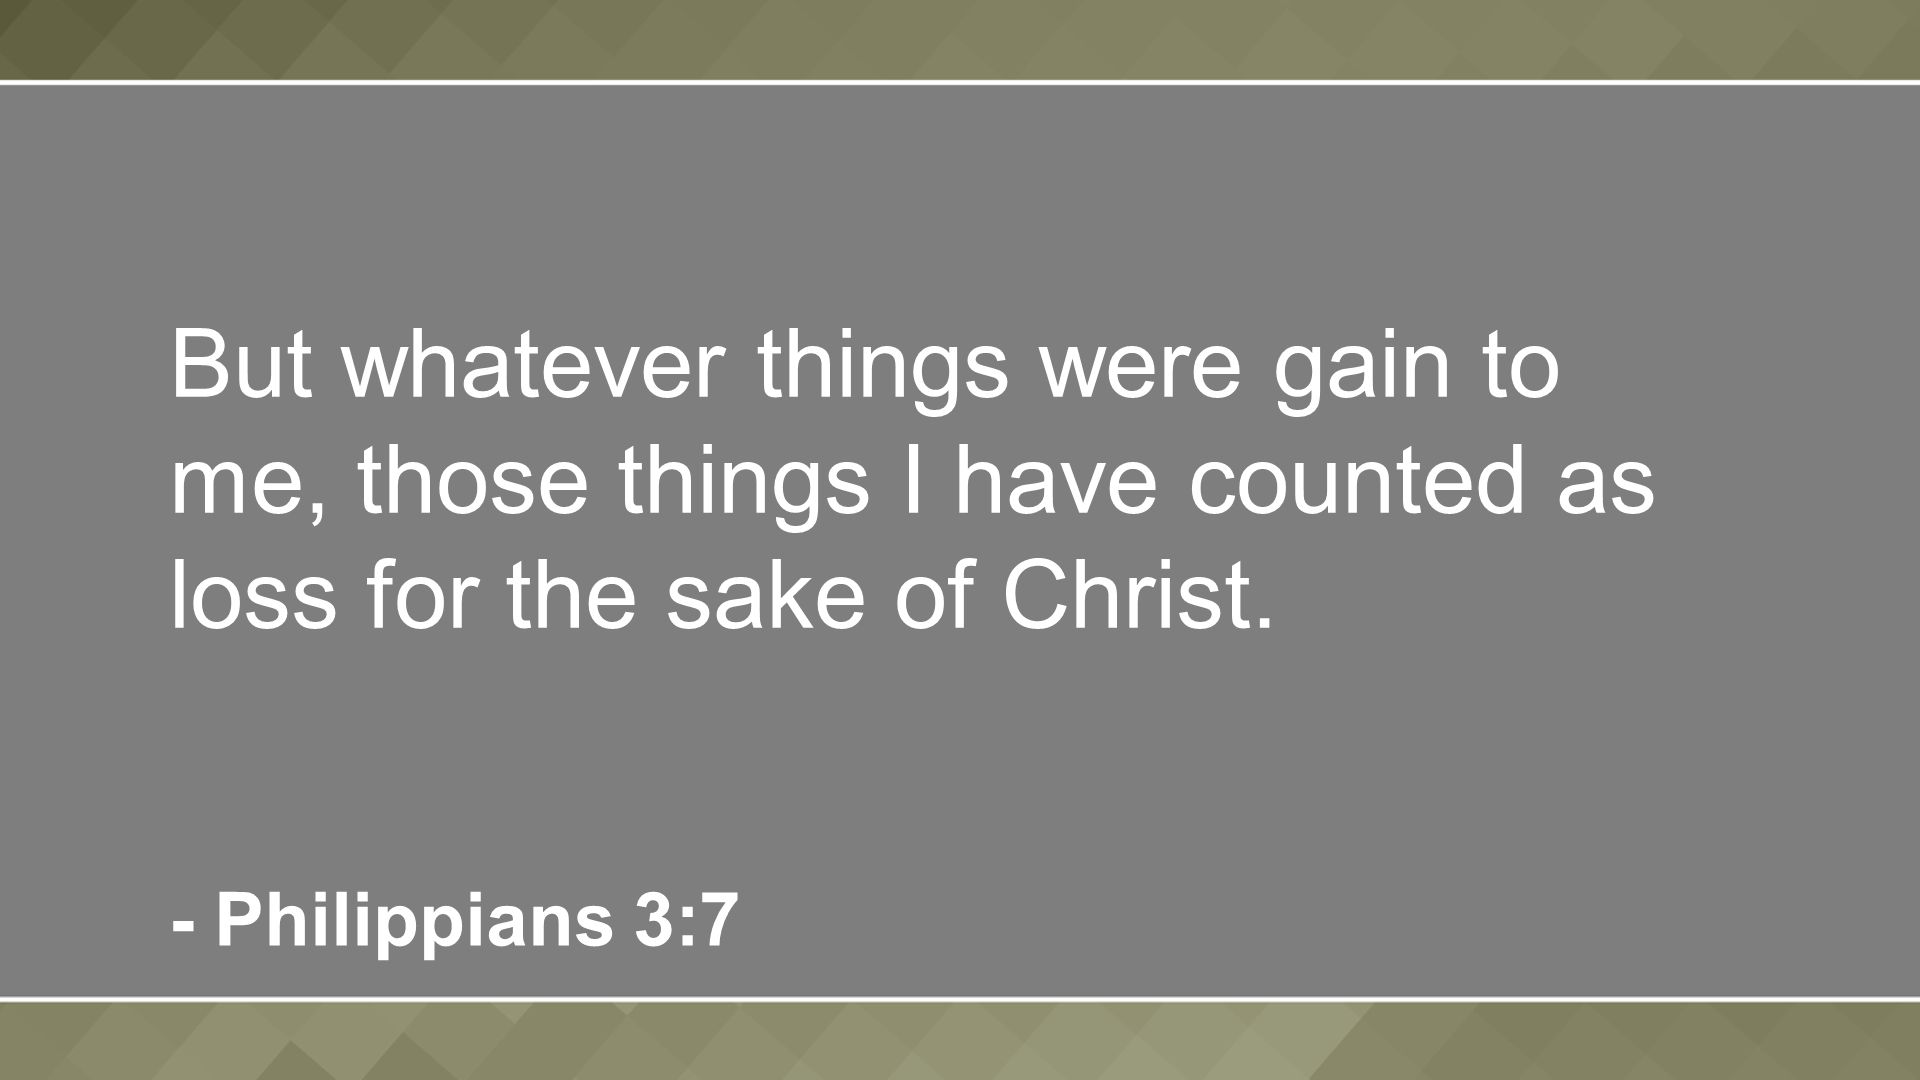 But whatever things were gain to me, those things I have counted as loss for the sake of Christ.